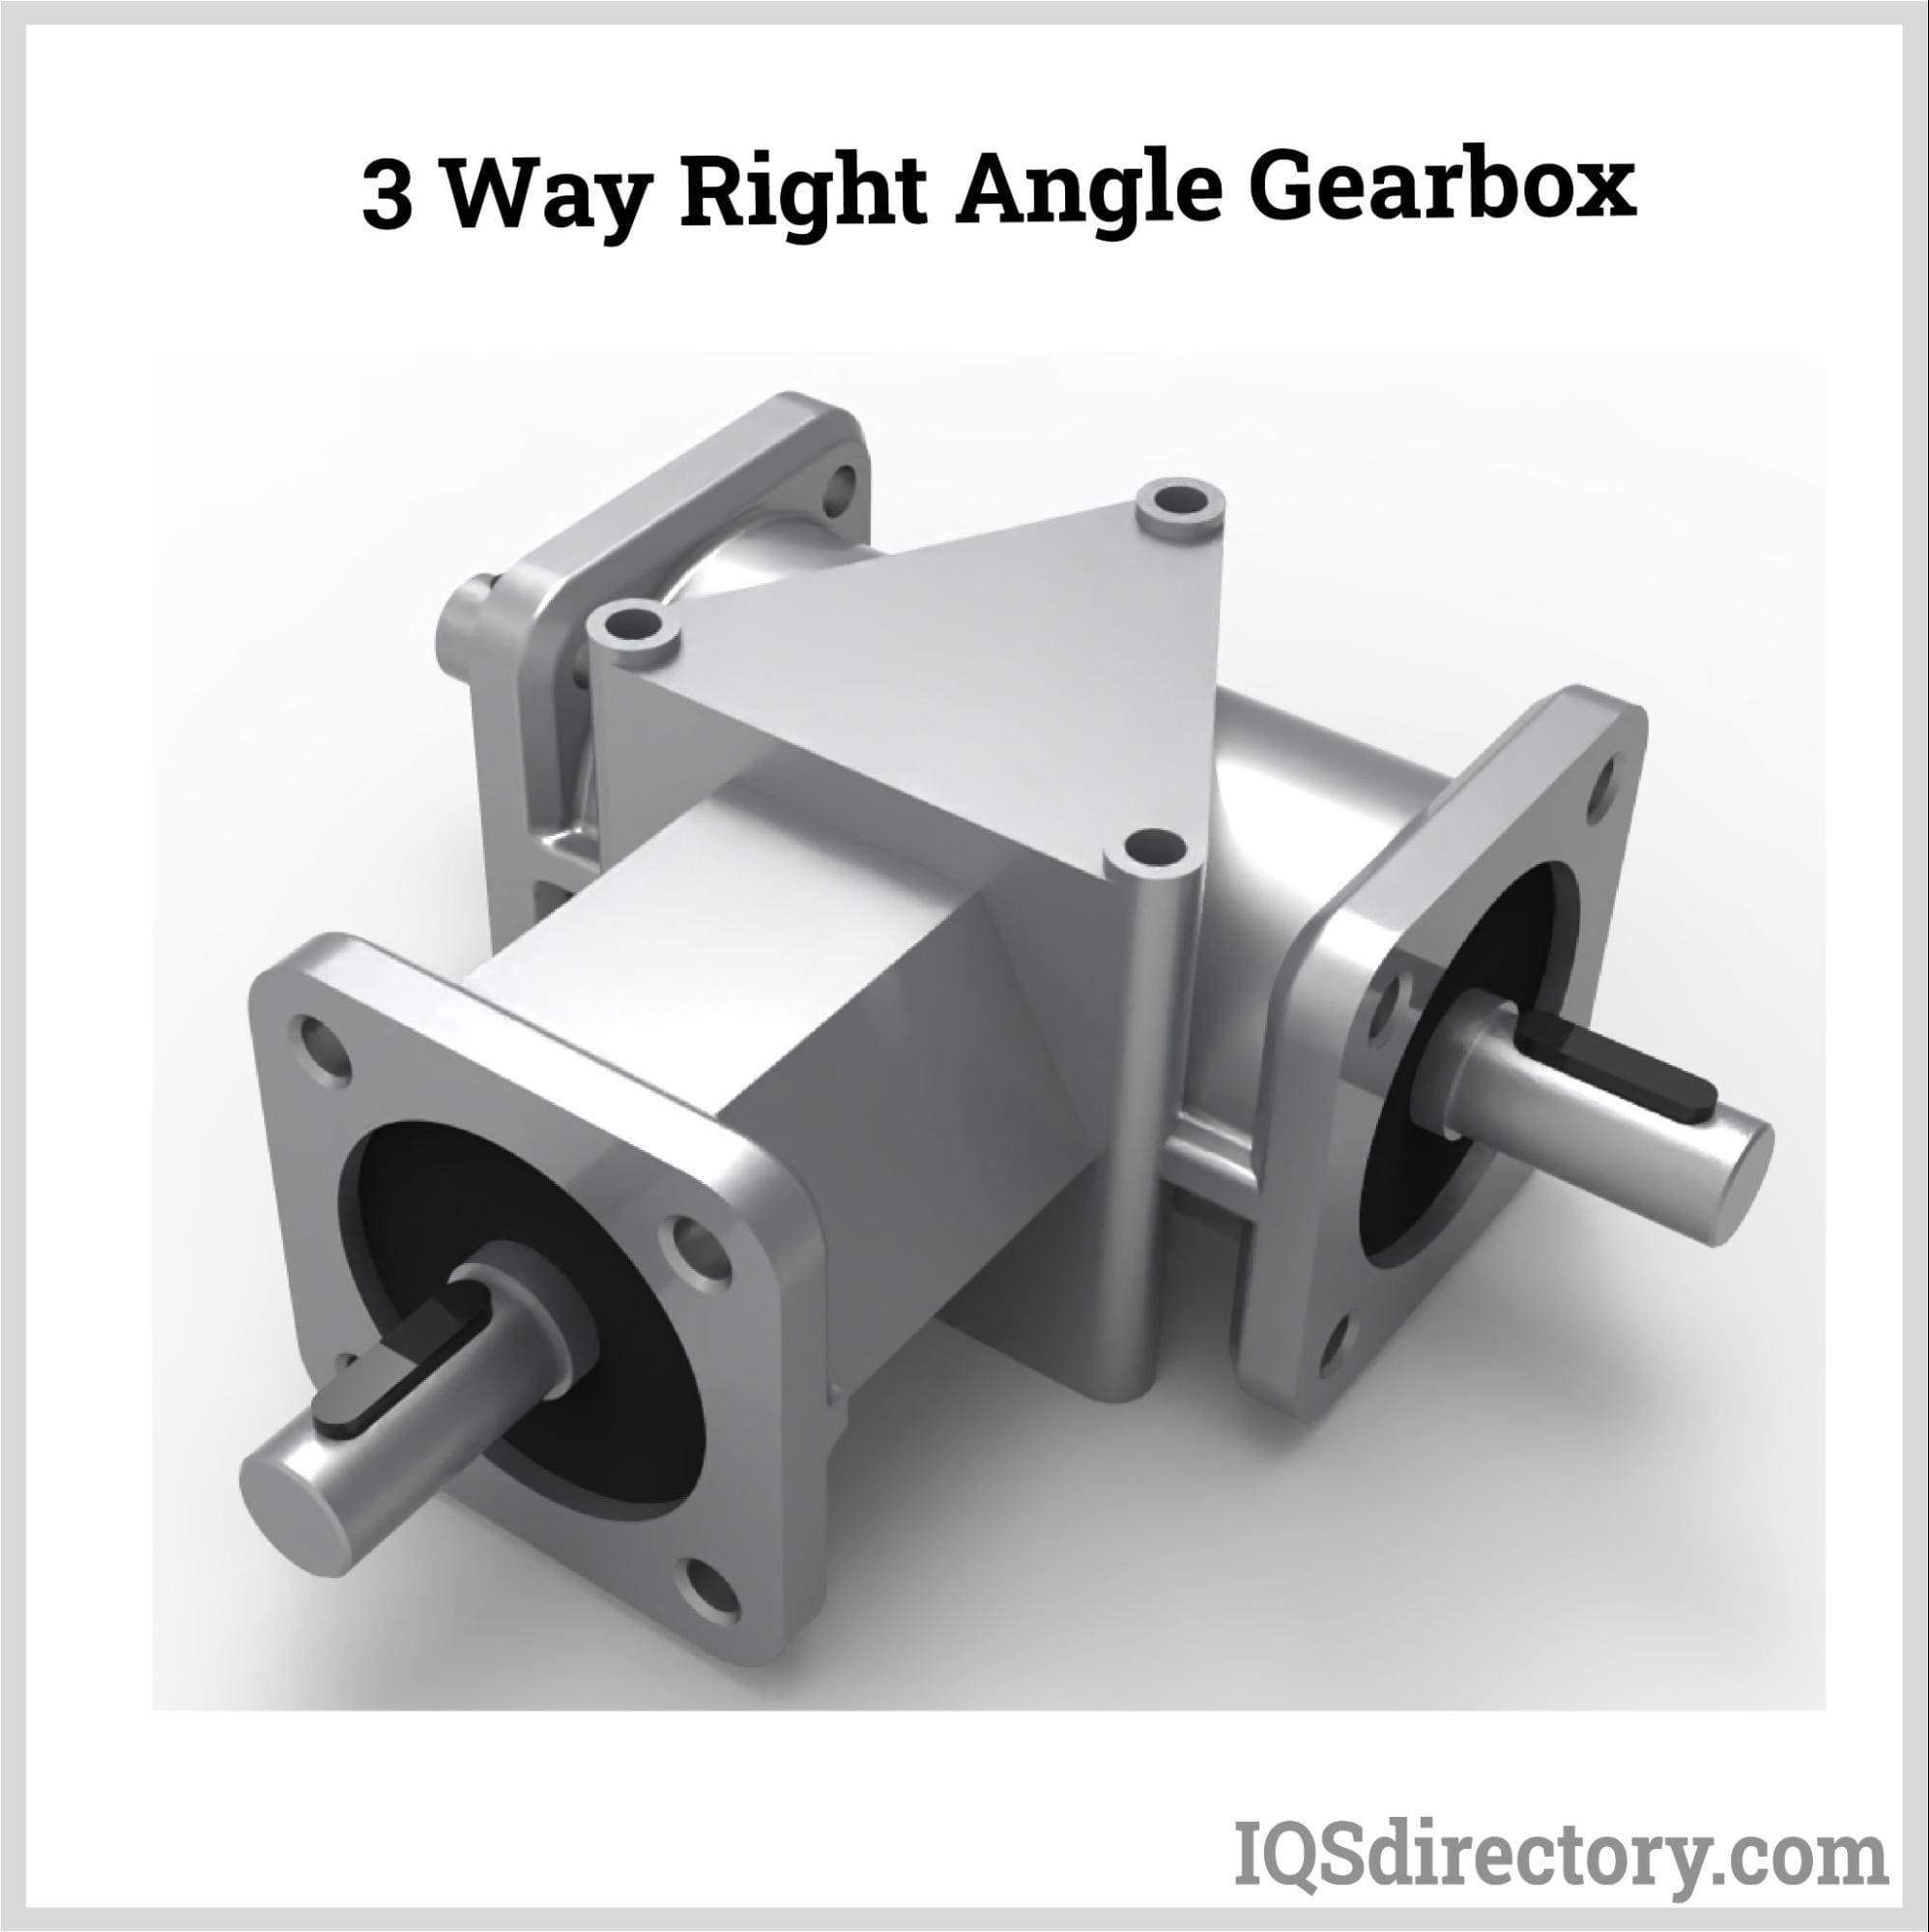 3 Way Right Angle Gearbox